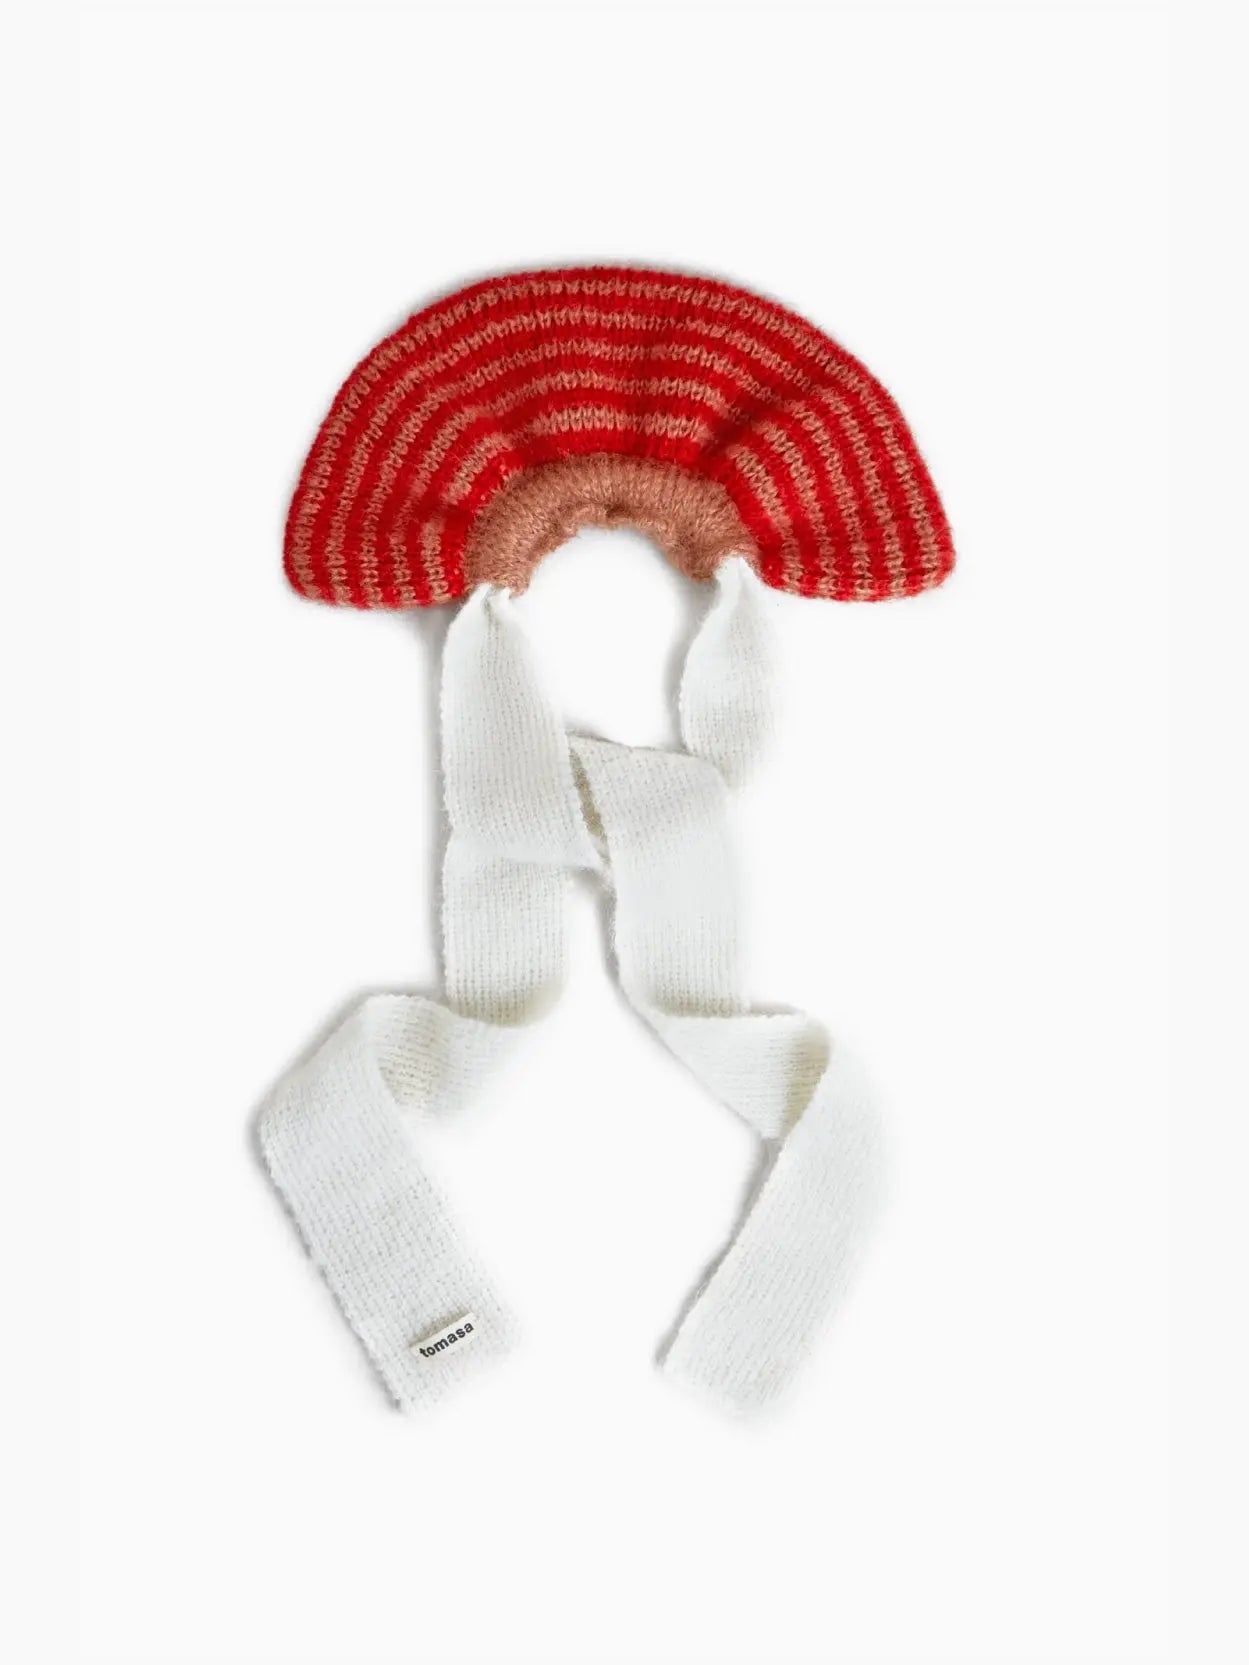 A whimsical Amapola Mohair Bow Scrunchie from Tomasa, colored in red and pink stripes, features long white knitted ties extending downwards. The scrunchie has a unique semi-circular shape, reminiscent of a rainbow. Available at our Barcelona store, the long ties are designed to wrap around for added warmth and style.